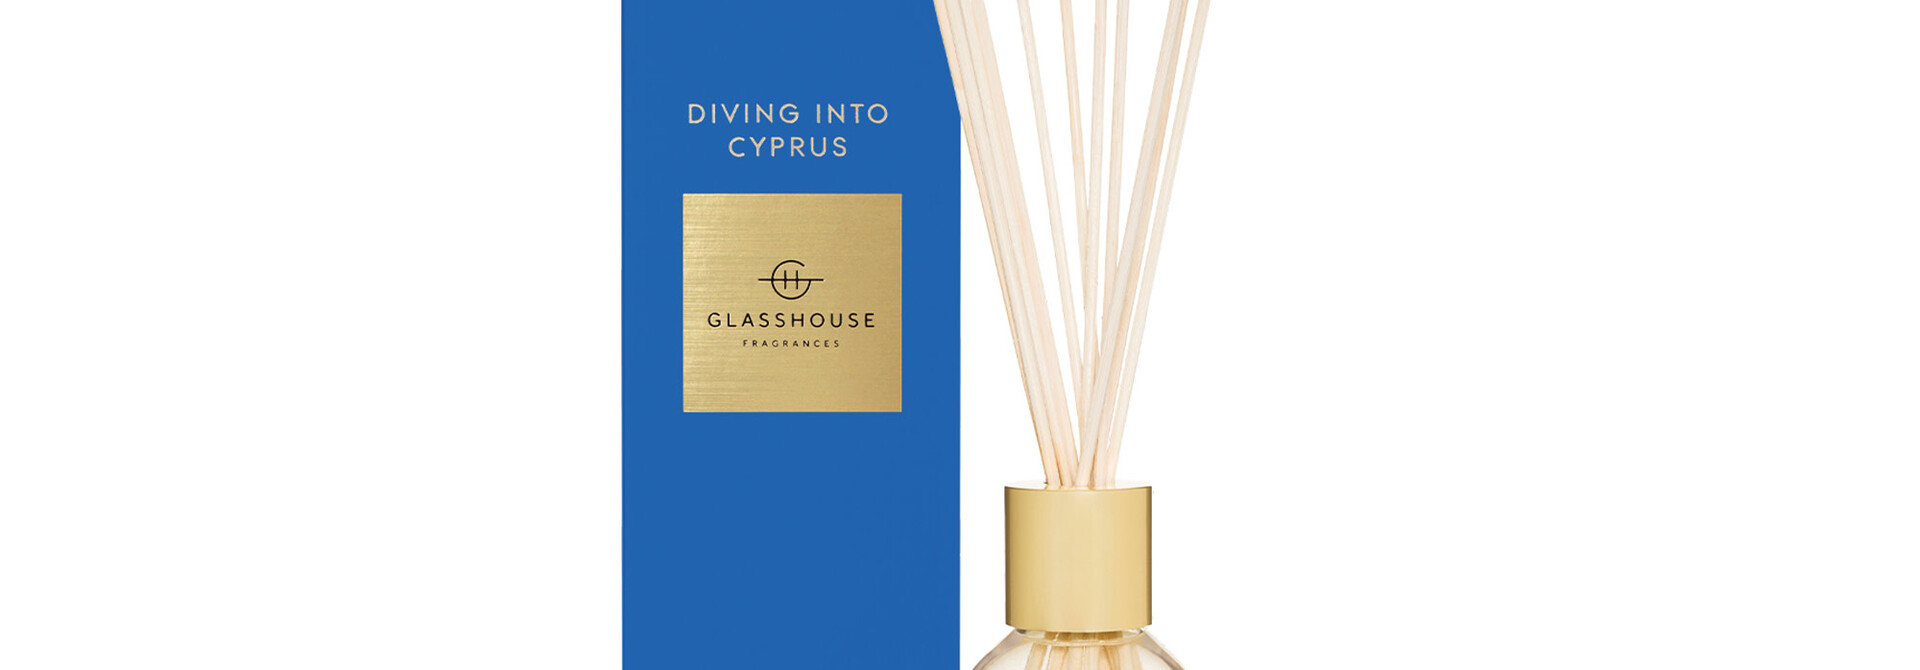 Diving into Cyprus | The Home Fragrance Collection, Diffuser - 8.4 Oz